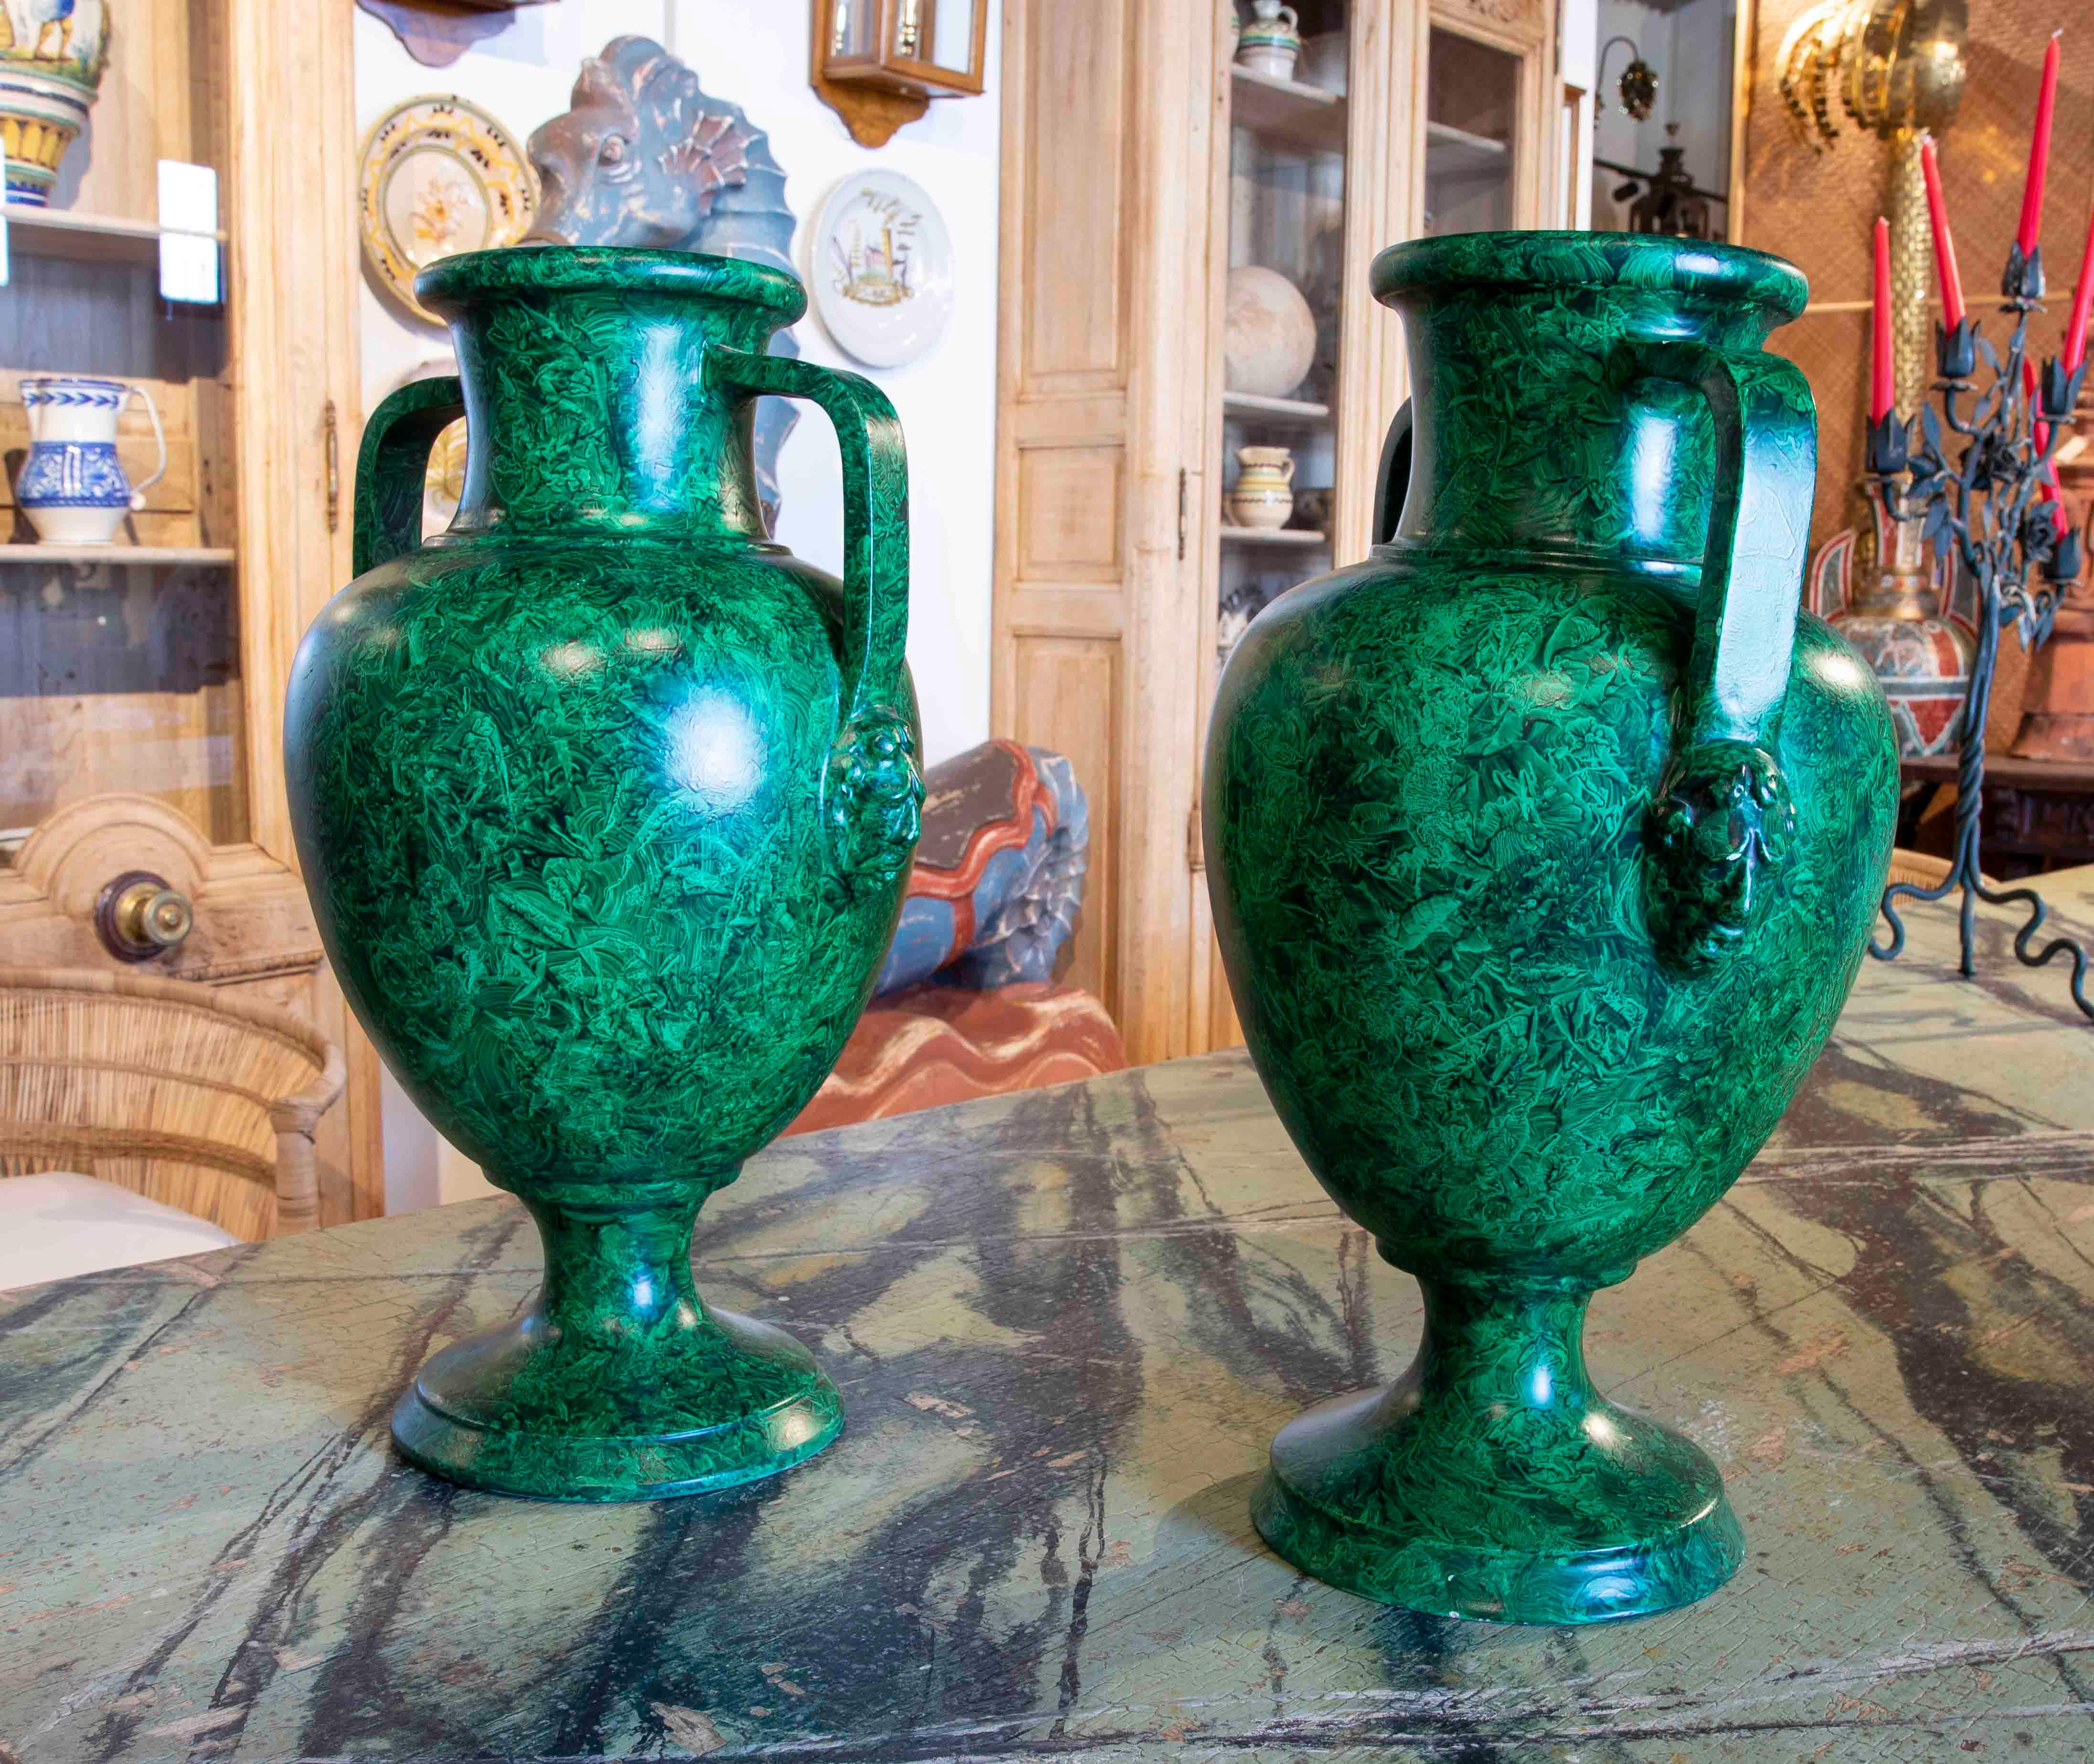 Pair of hand painted ceramic cups imitating malachite 1970s, with handles and heads of characters on the sides.